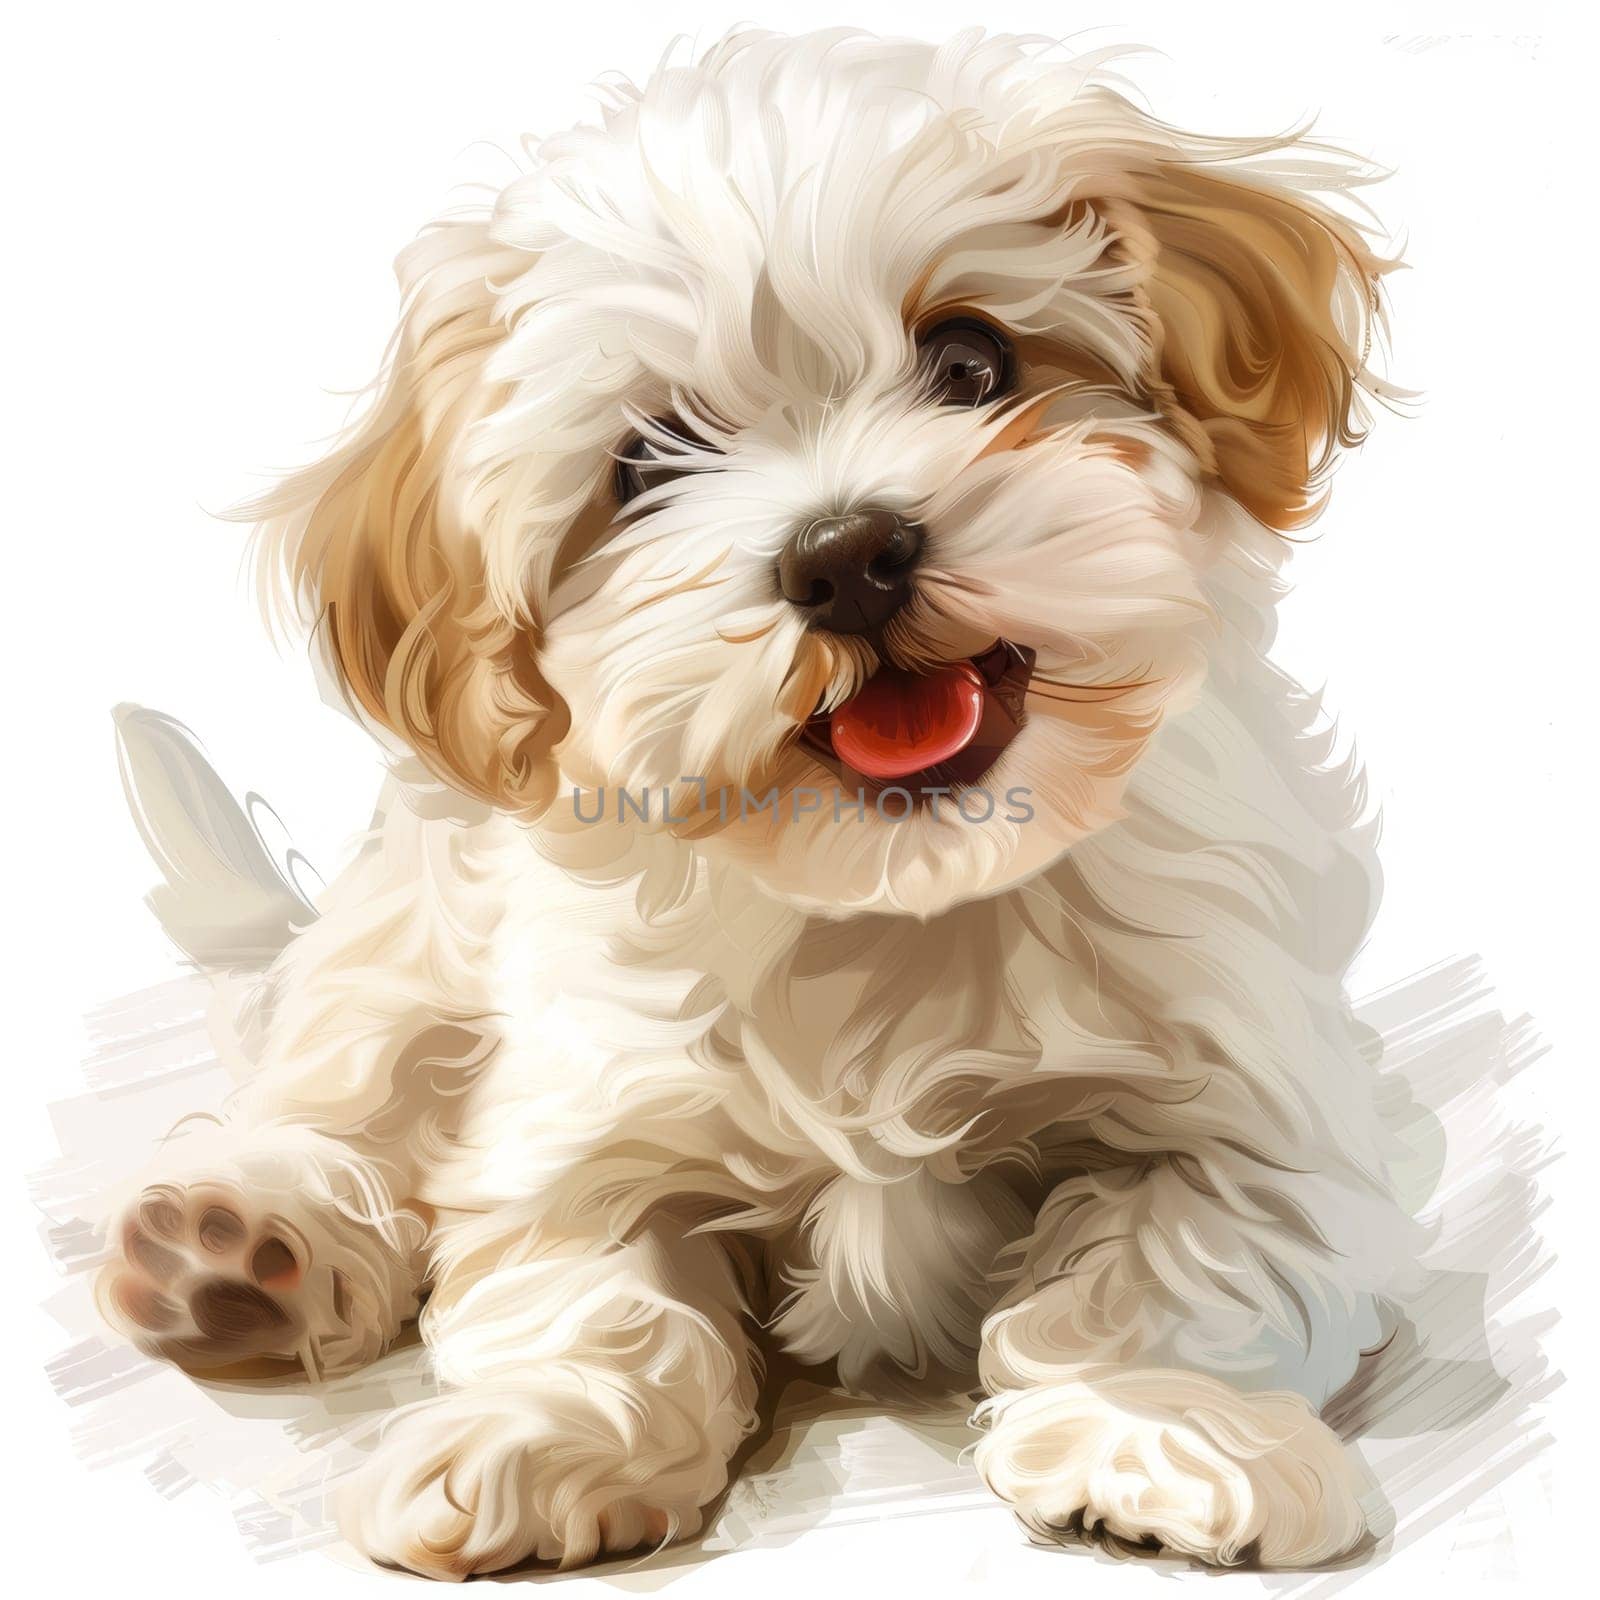 The Bichon Frise breed dog is isolated on a white background. Illustration by Lobachad